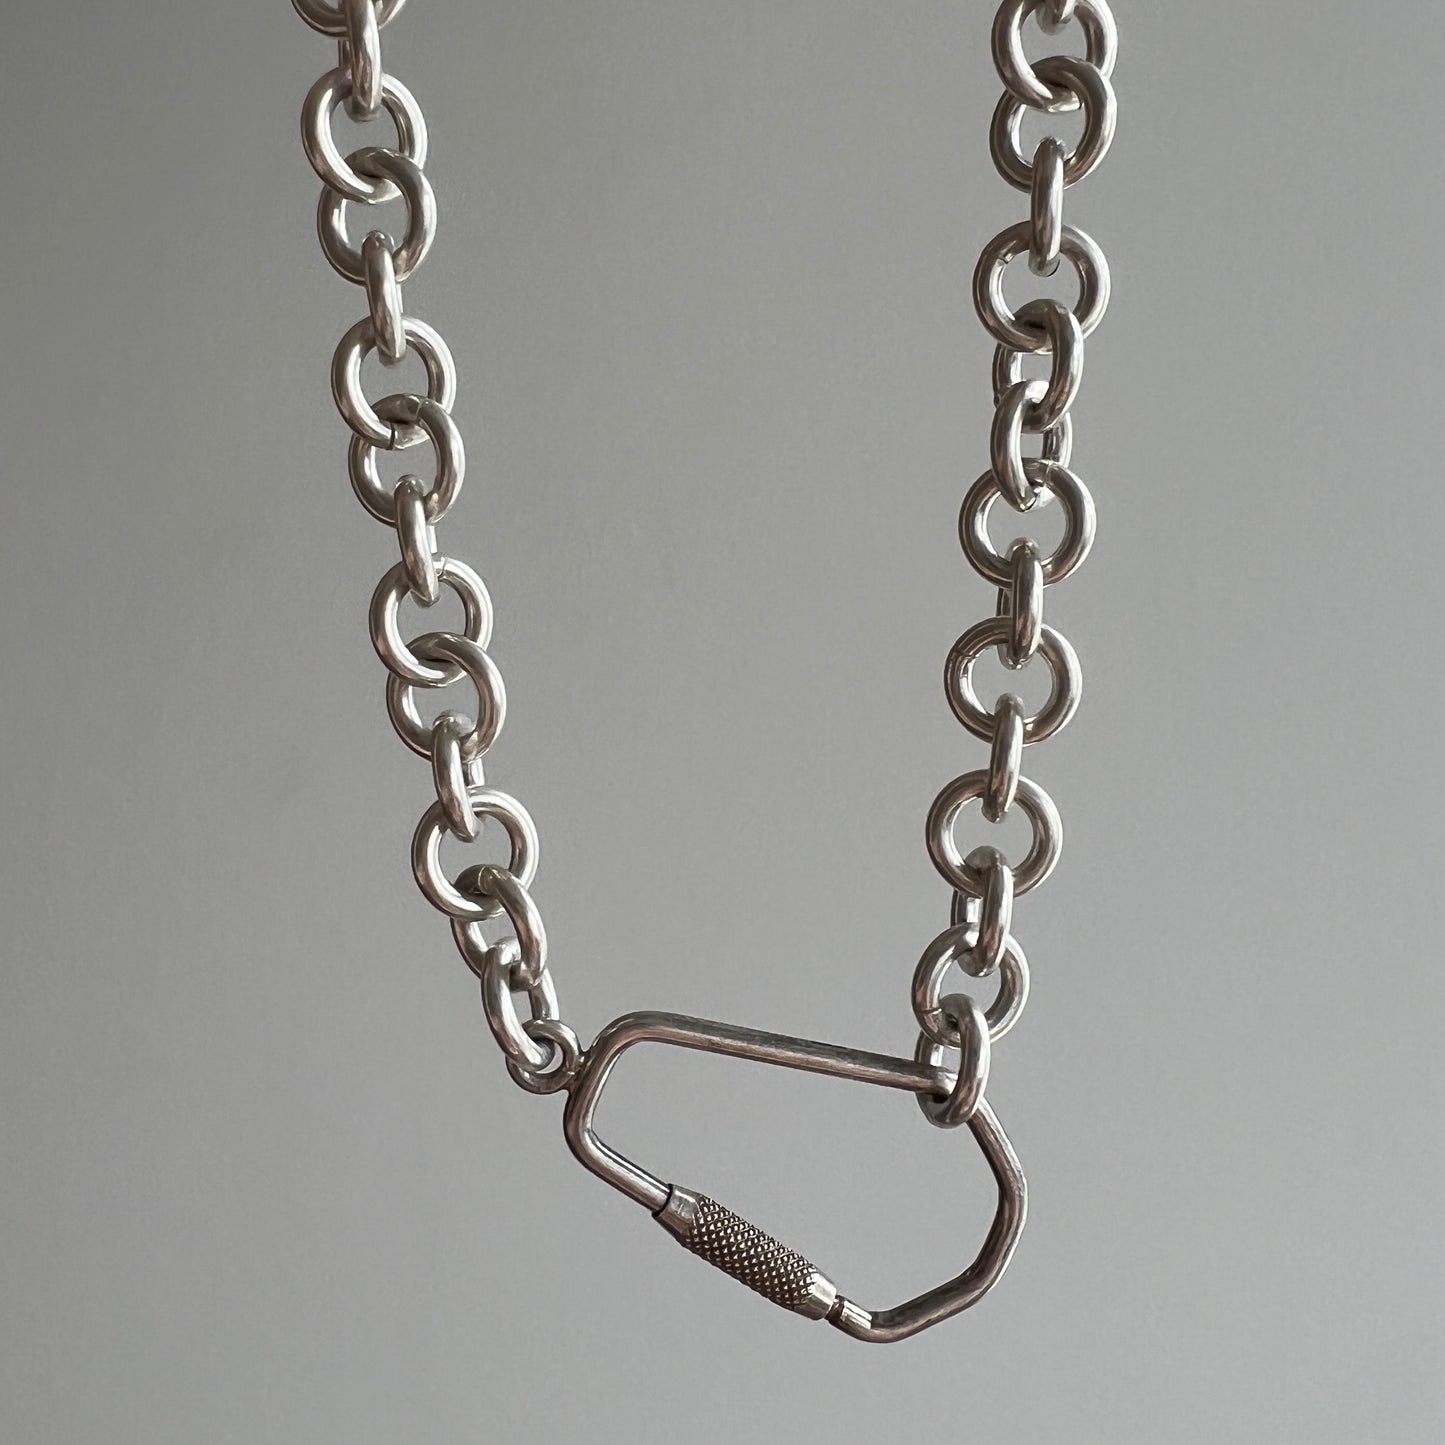 reimagined V I N T A G E // coffin connector / sterling silver rolo chain with carabiner pendant holder / up to 17",